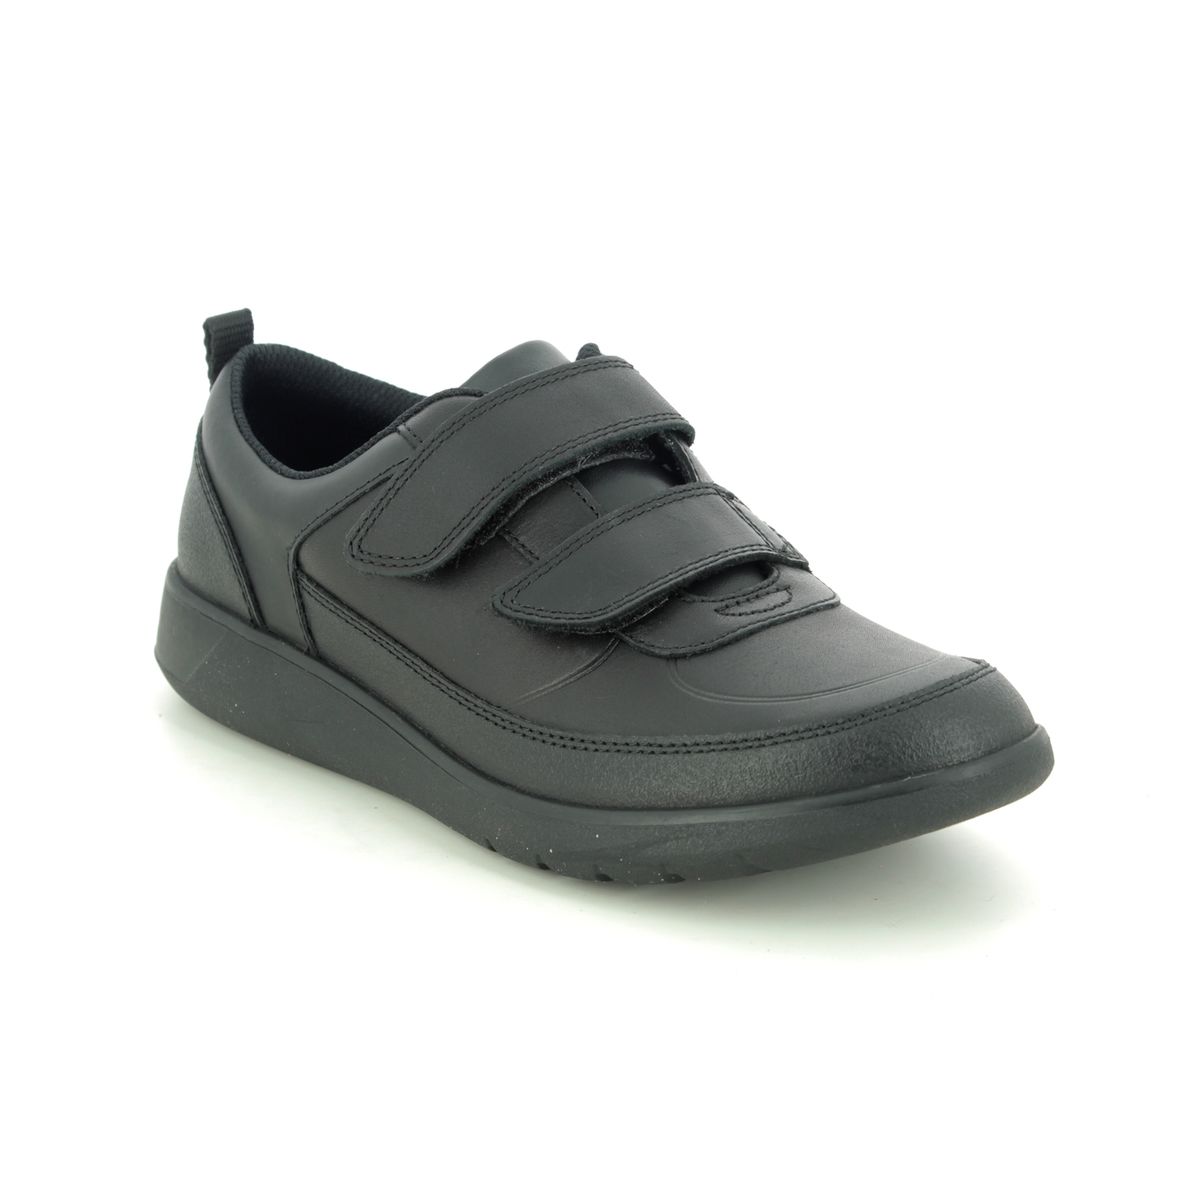 Clarks Scape Flare Y Black Leather Kids Boys Shoes 494097G In Size 4.5 In Plain Black Leather G Width Fitting For School For kids